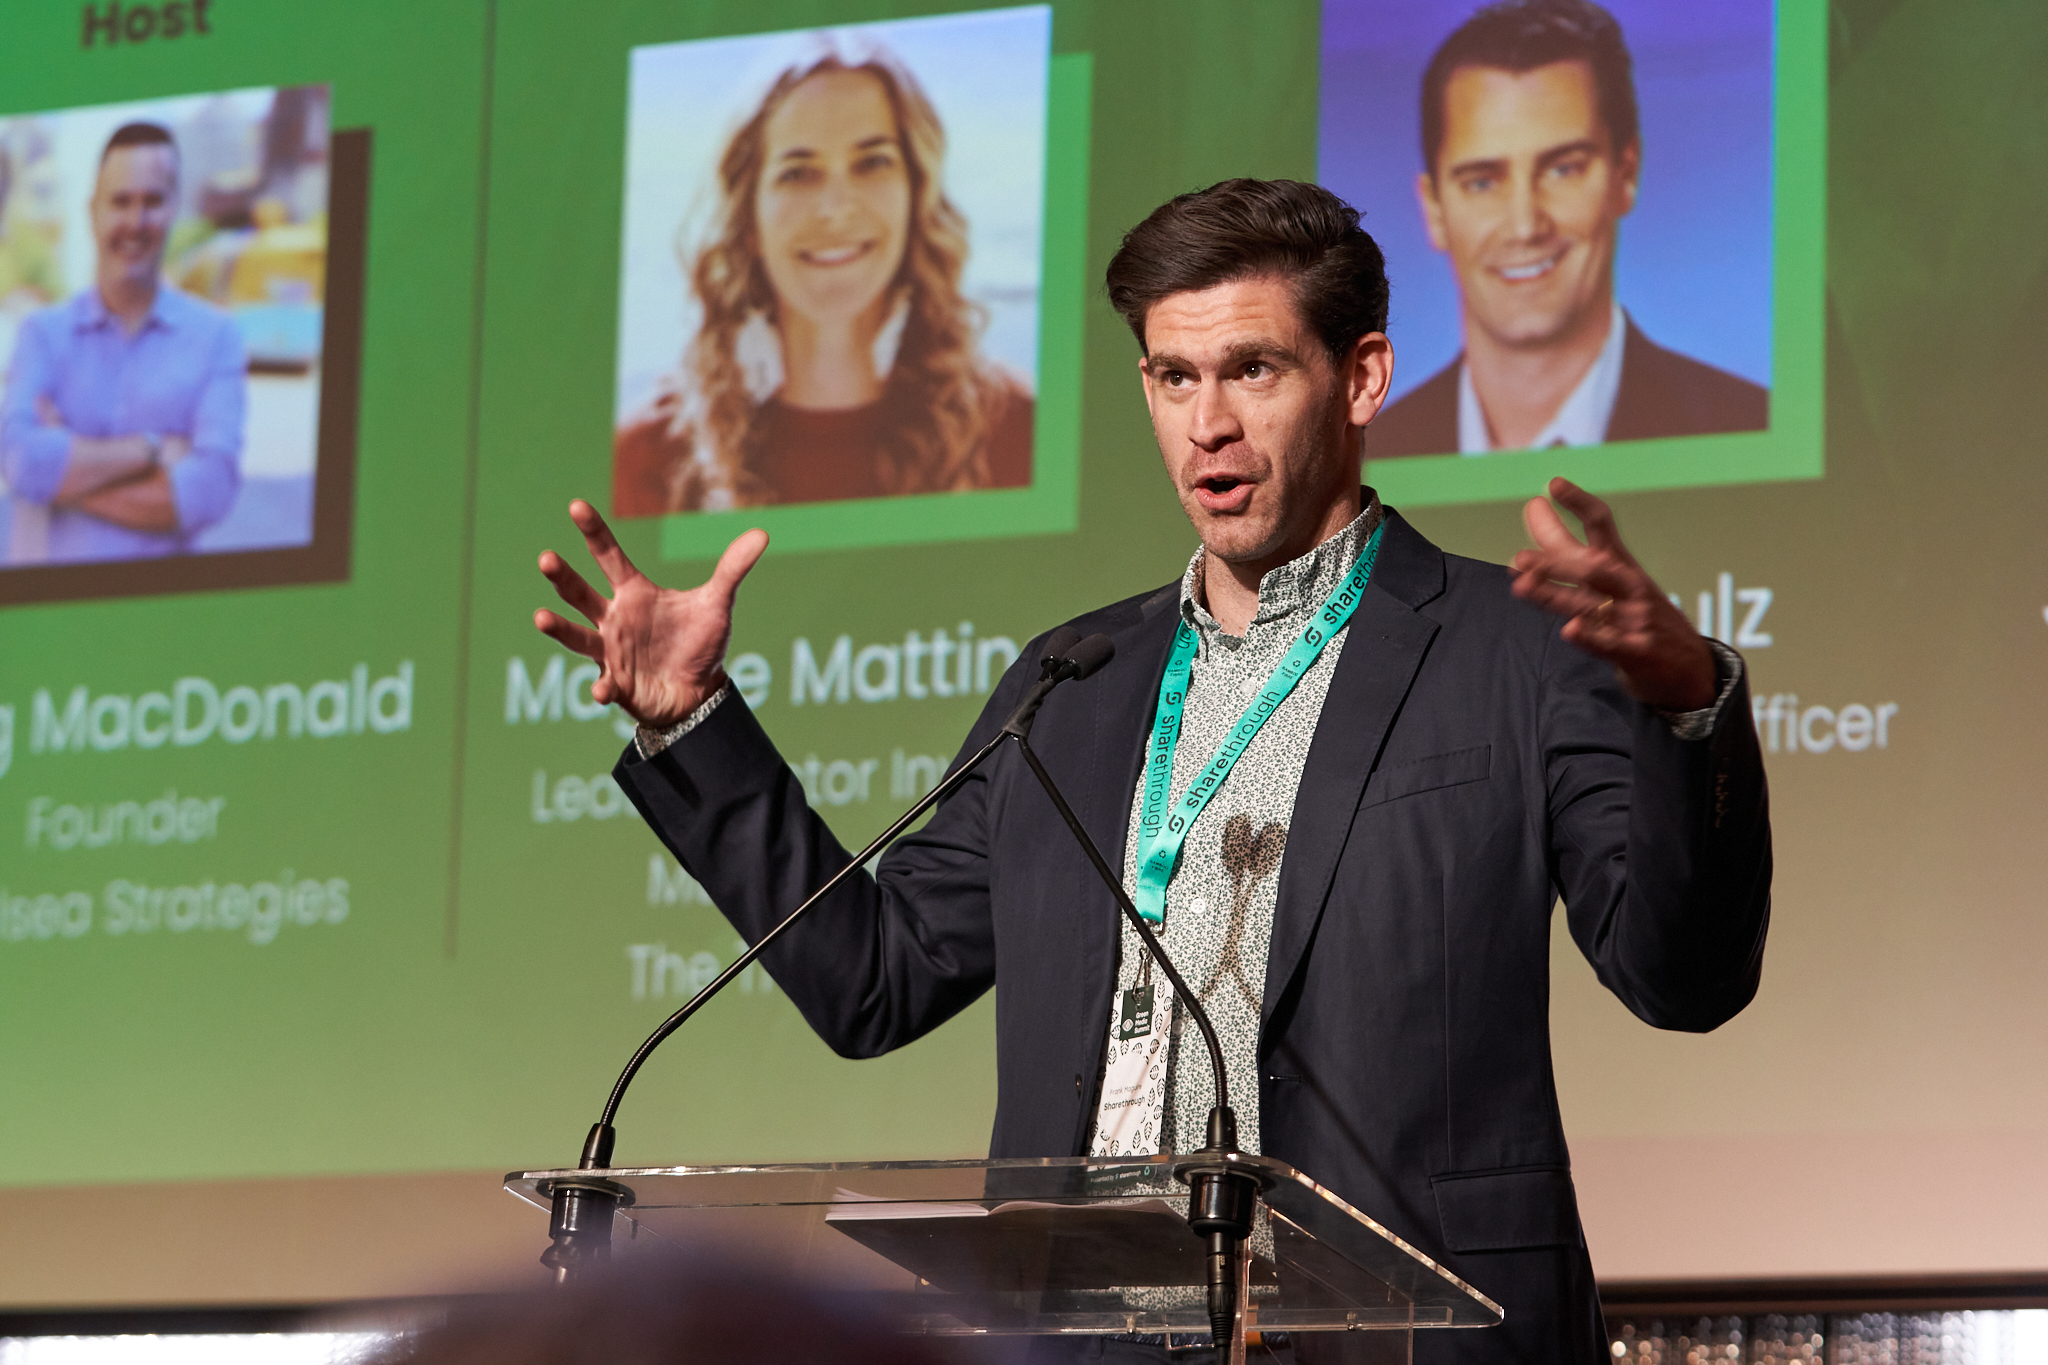 Top 5 Key Lessons From the Green Media Summit